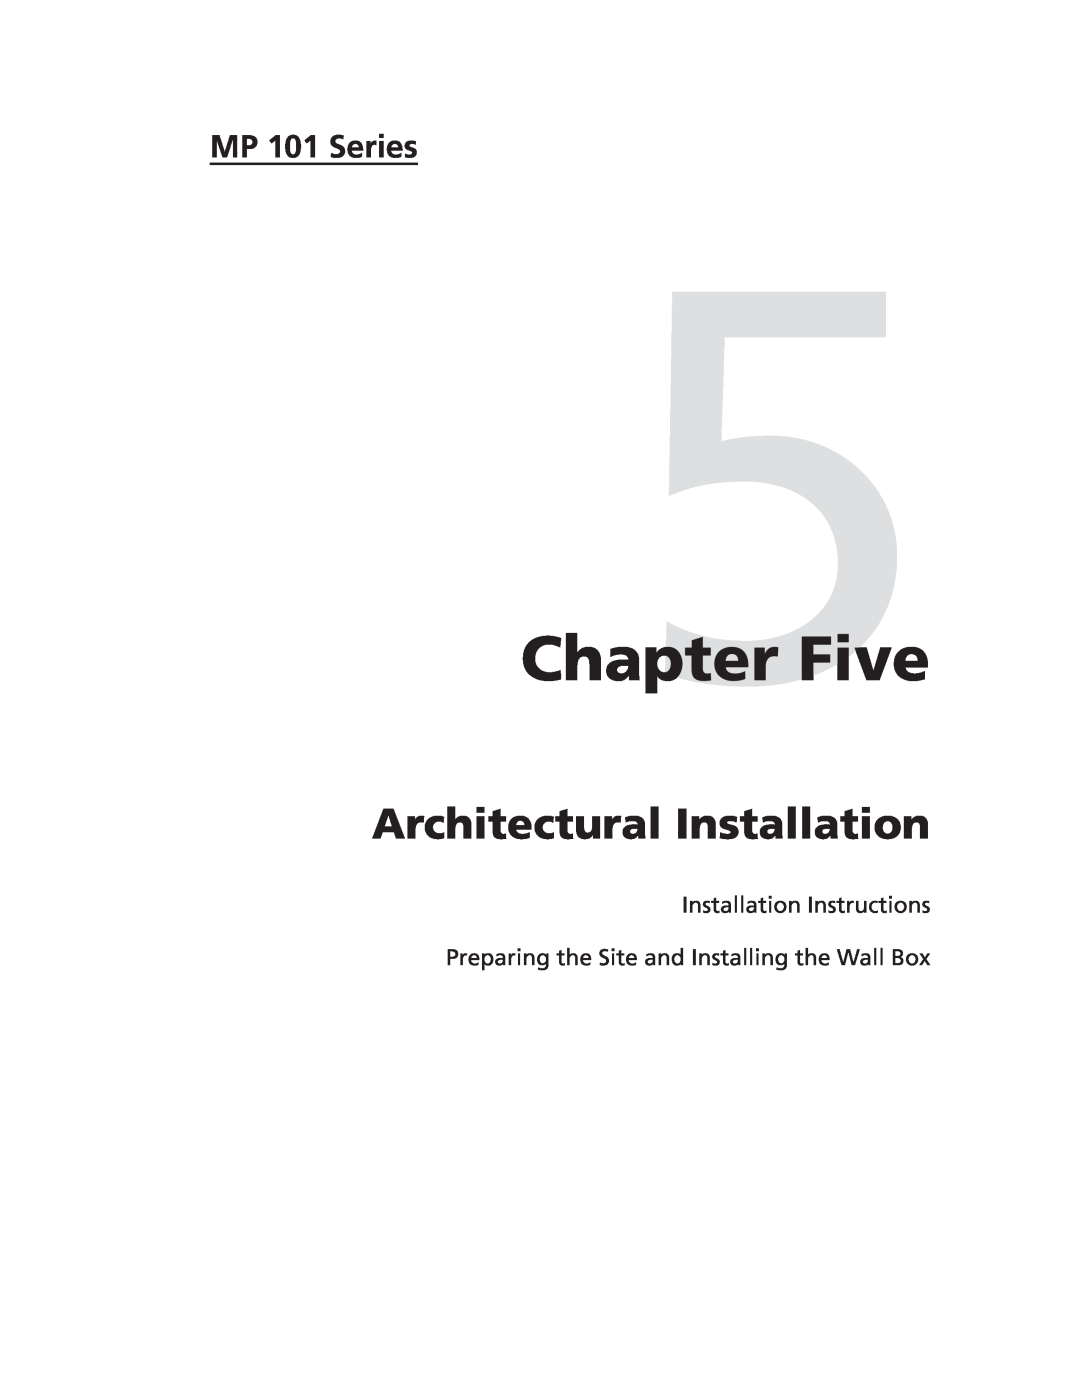 Extron electronic user manual Five, Architectural Installation, Installation Instructions, MP 101 Series 